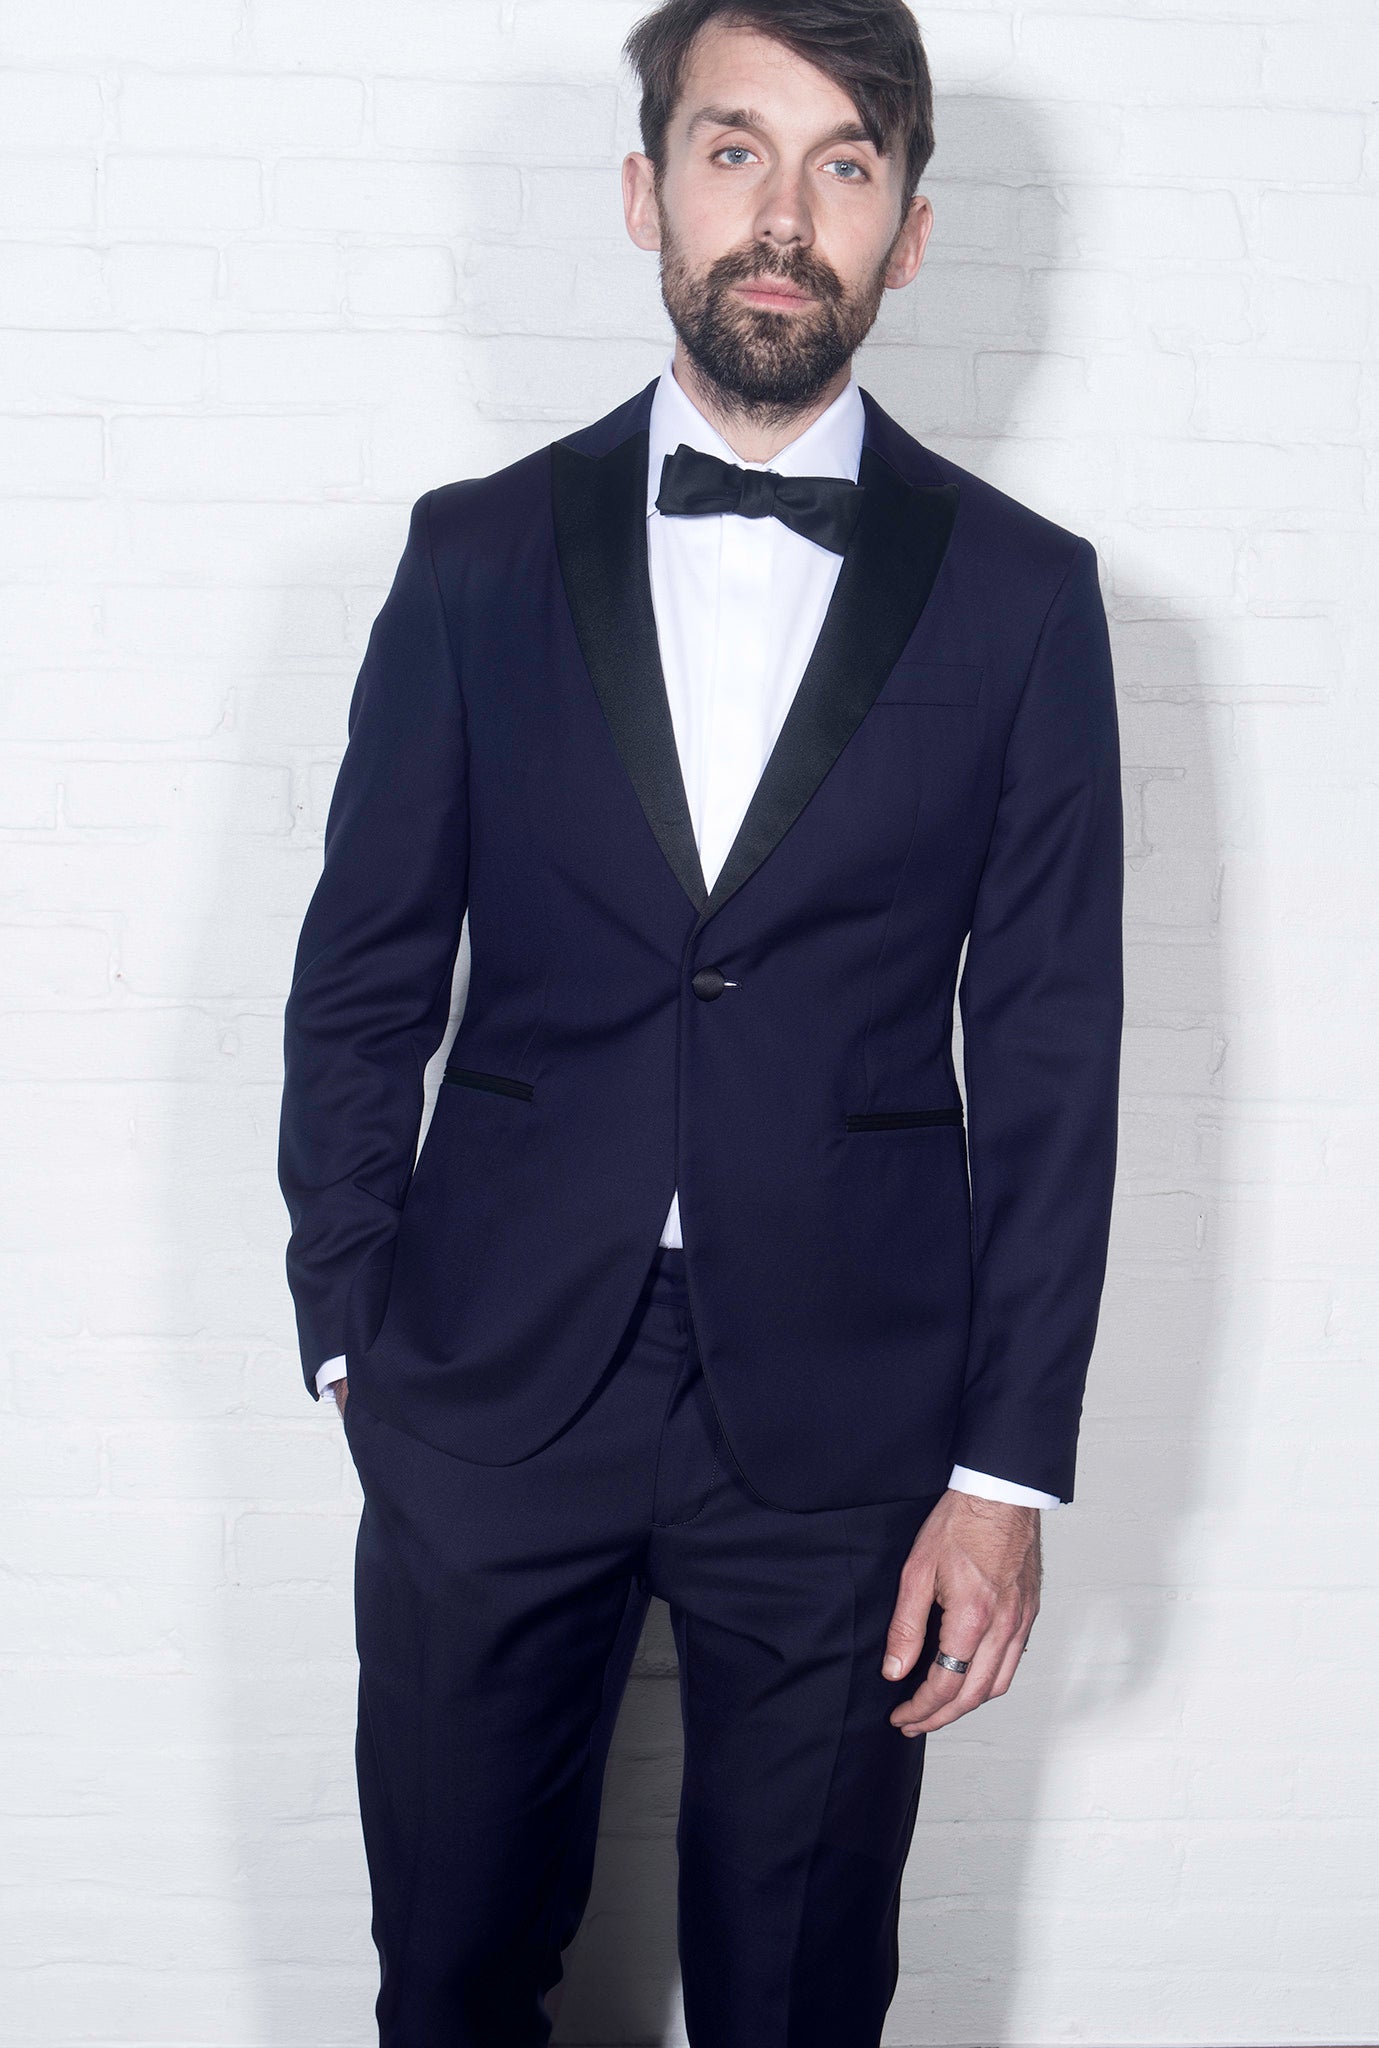 Brooklyn Tailors BKT50 Peak Lapel Tuxedo Jacket in Super 110s - Navy with Satin Lapel on-body shot. Model is wearing the jacket with matching trousers, a white tuxedo shirt, and a black bowtie